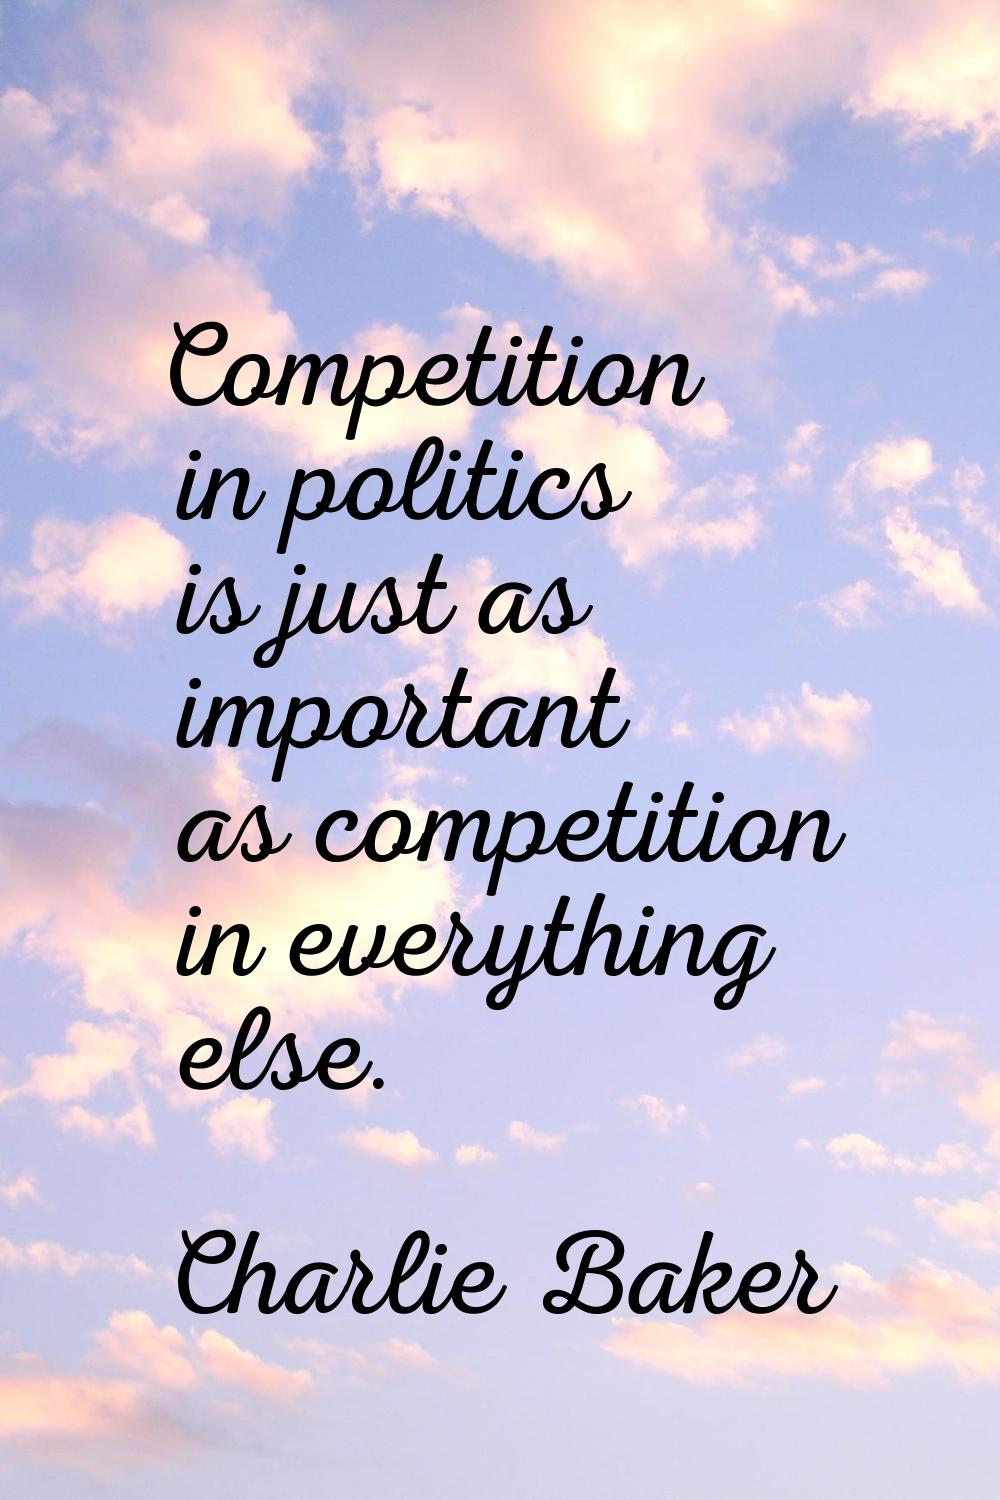 Competition in politics is just as important as competition in everything else.